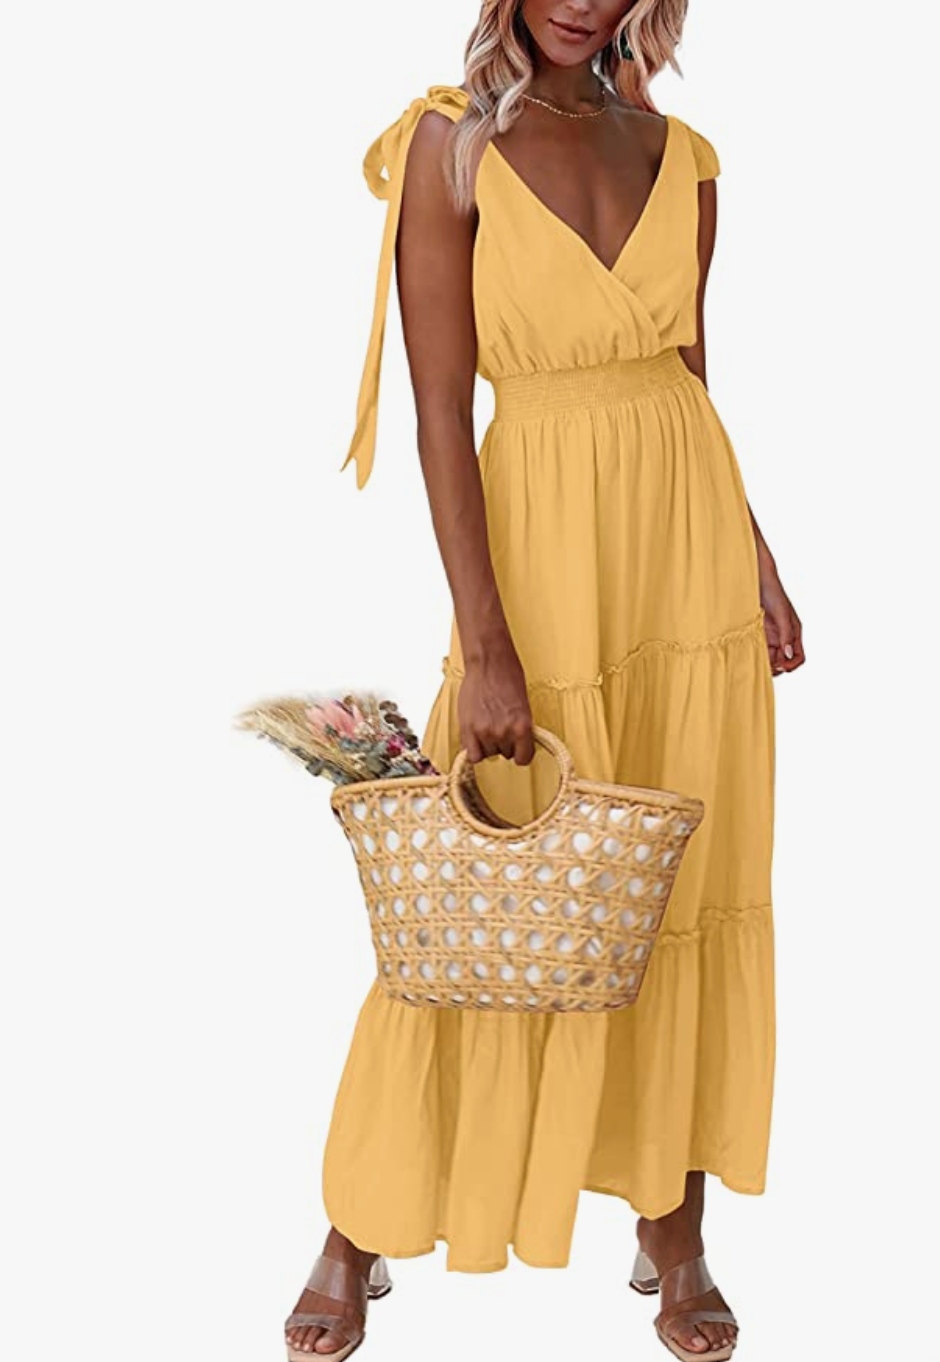 women's dresses for vacation